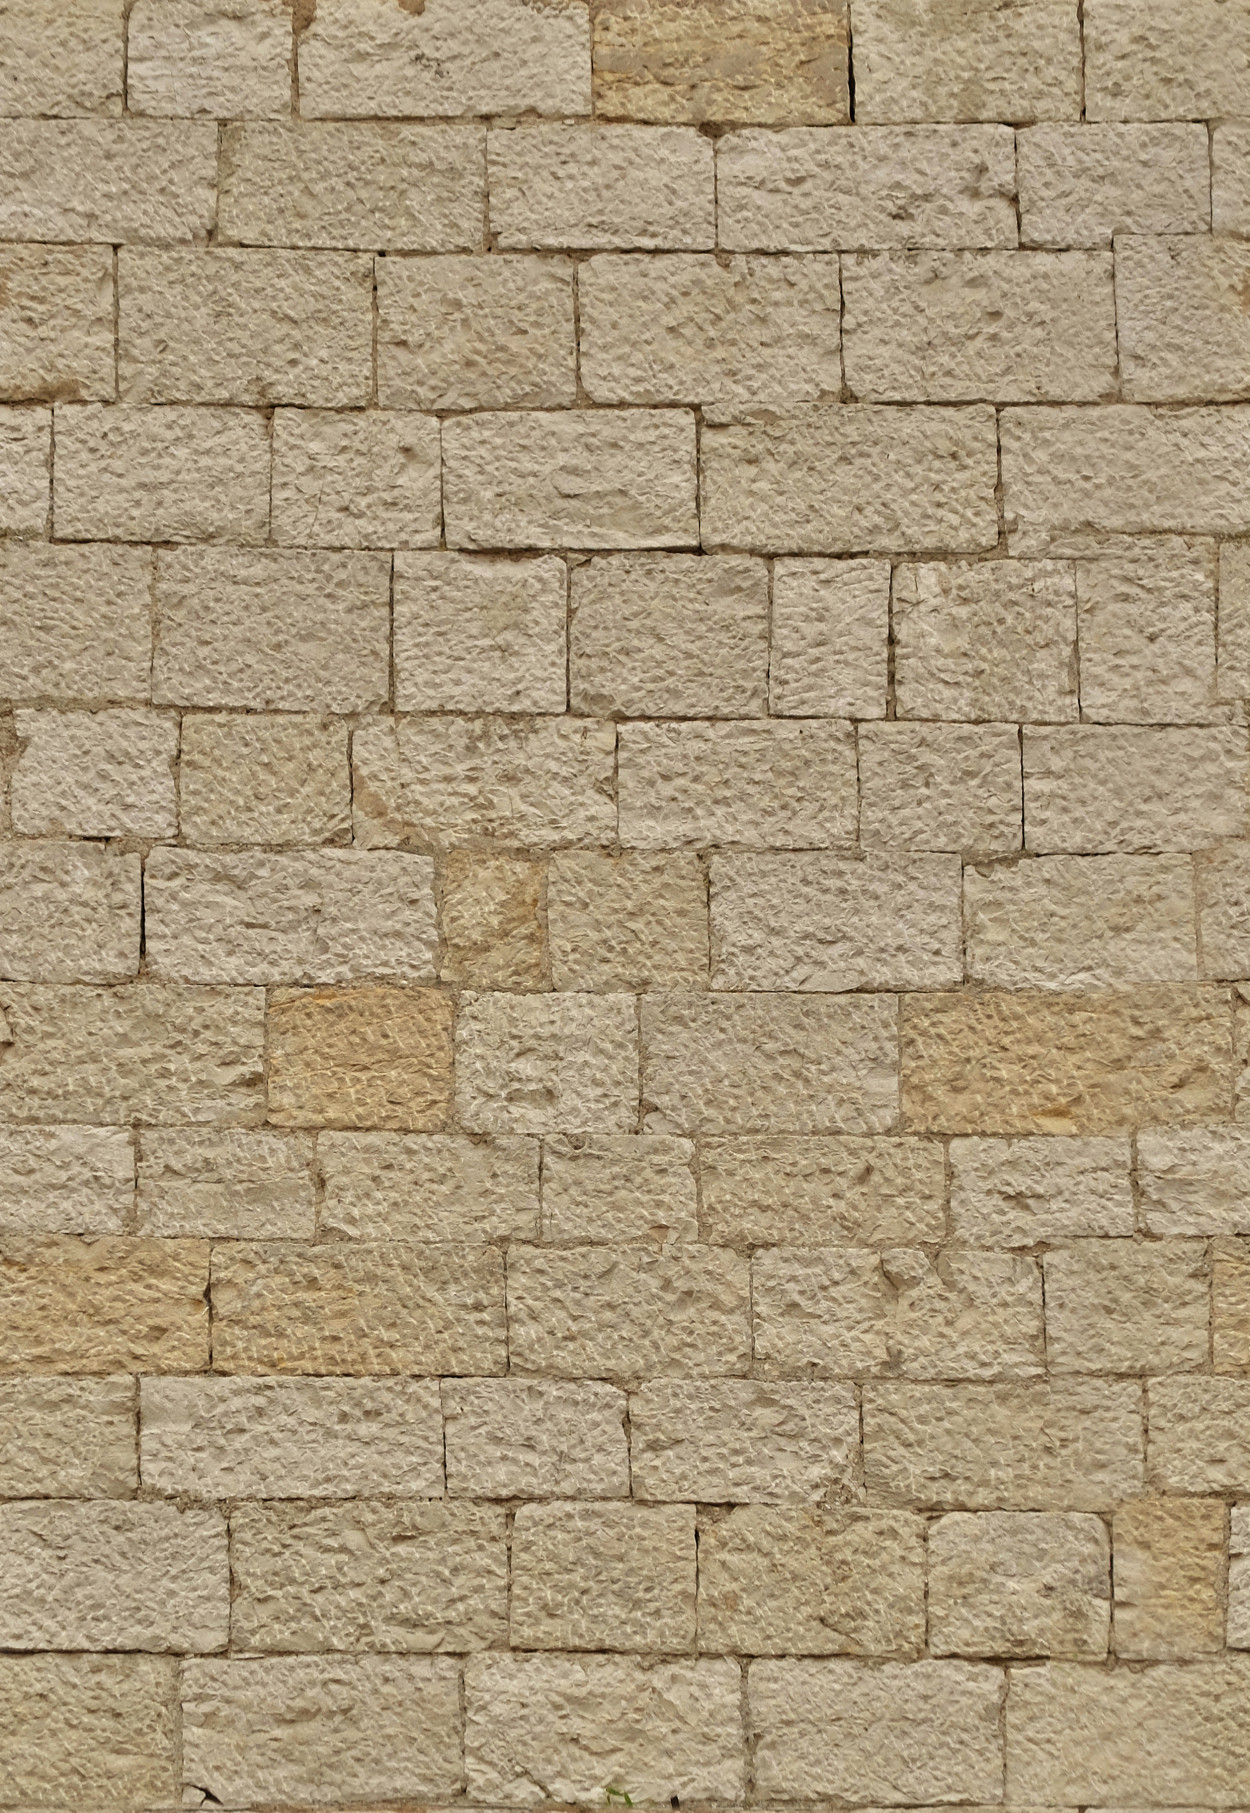 A seamless rough stone wall texture for use in architectural drawings and 3D models